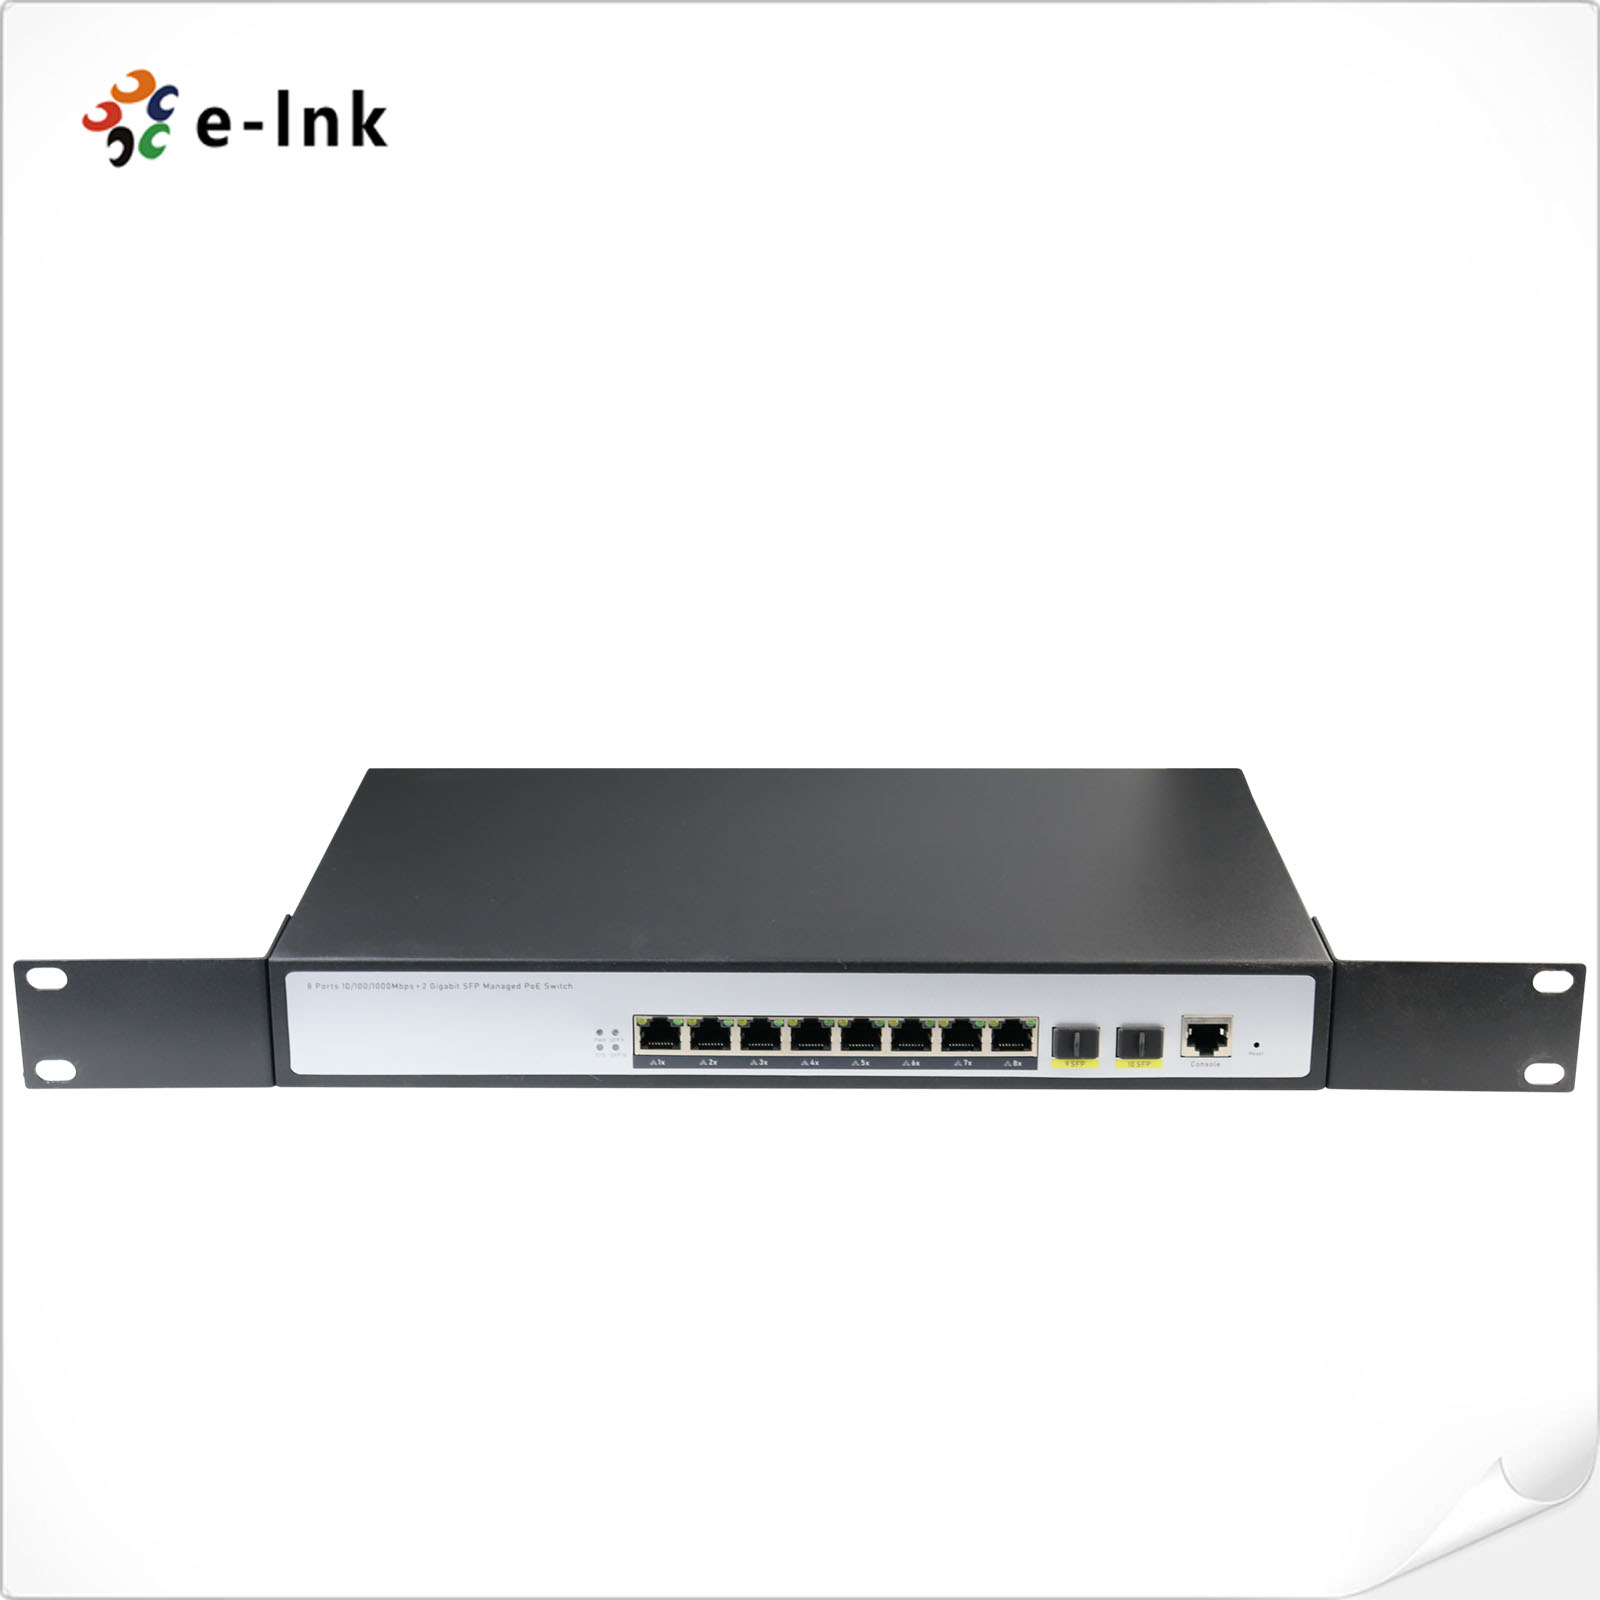 L2+ 8-Port 10/100/1000T 802.3at PoE + 2-Port 100/1000X SFP Managed Switch